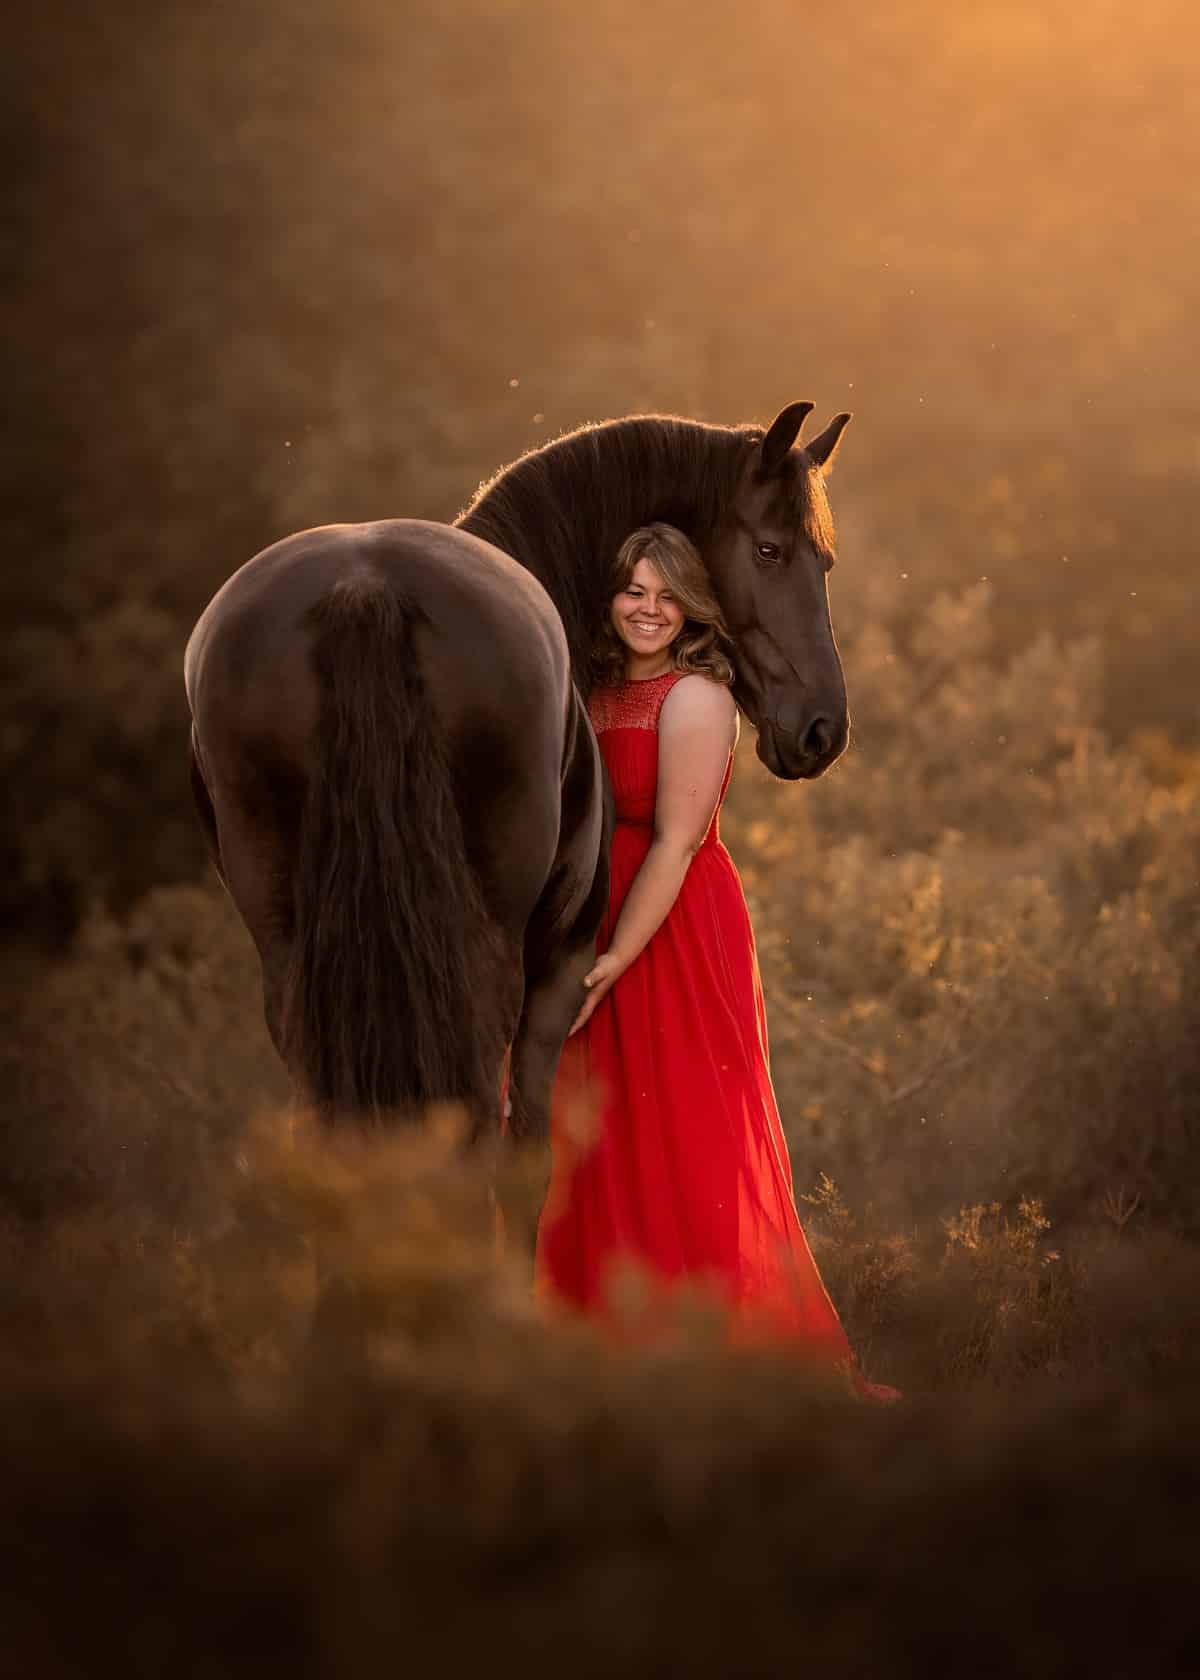 Woman in a red dress with her horse